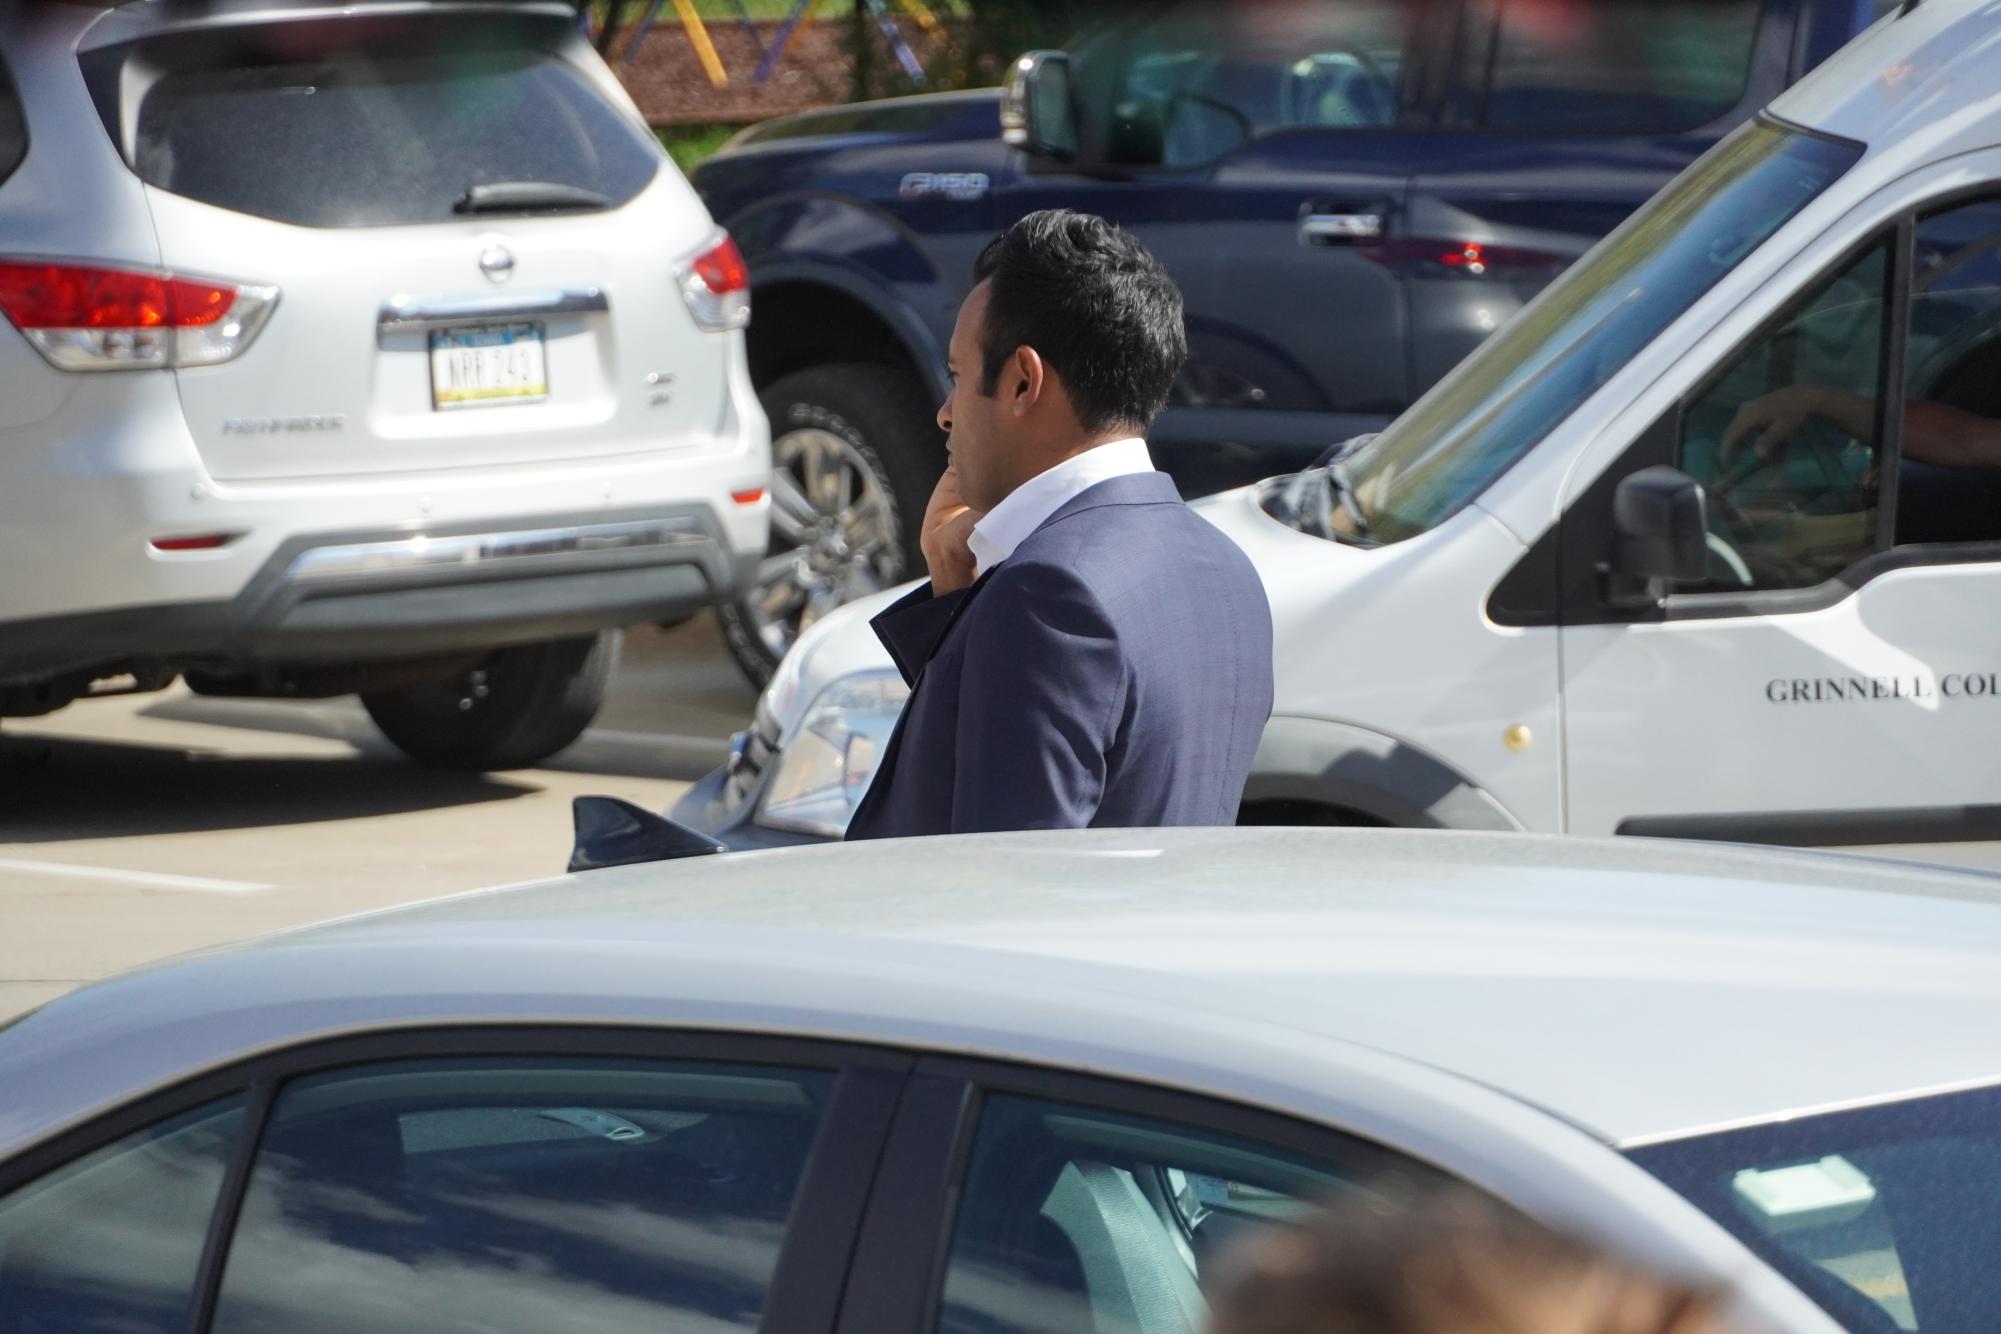 Ramaswamys talks on the phone as he prepares to walk into the event in Grinnell on Oct. 5, 2023. Moments later, a Grinnell College students accidentally backed into a campaign vehicle.